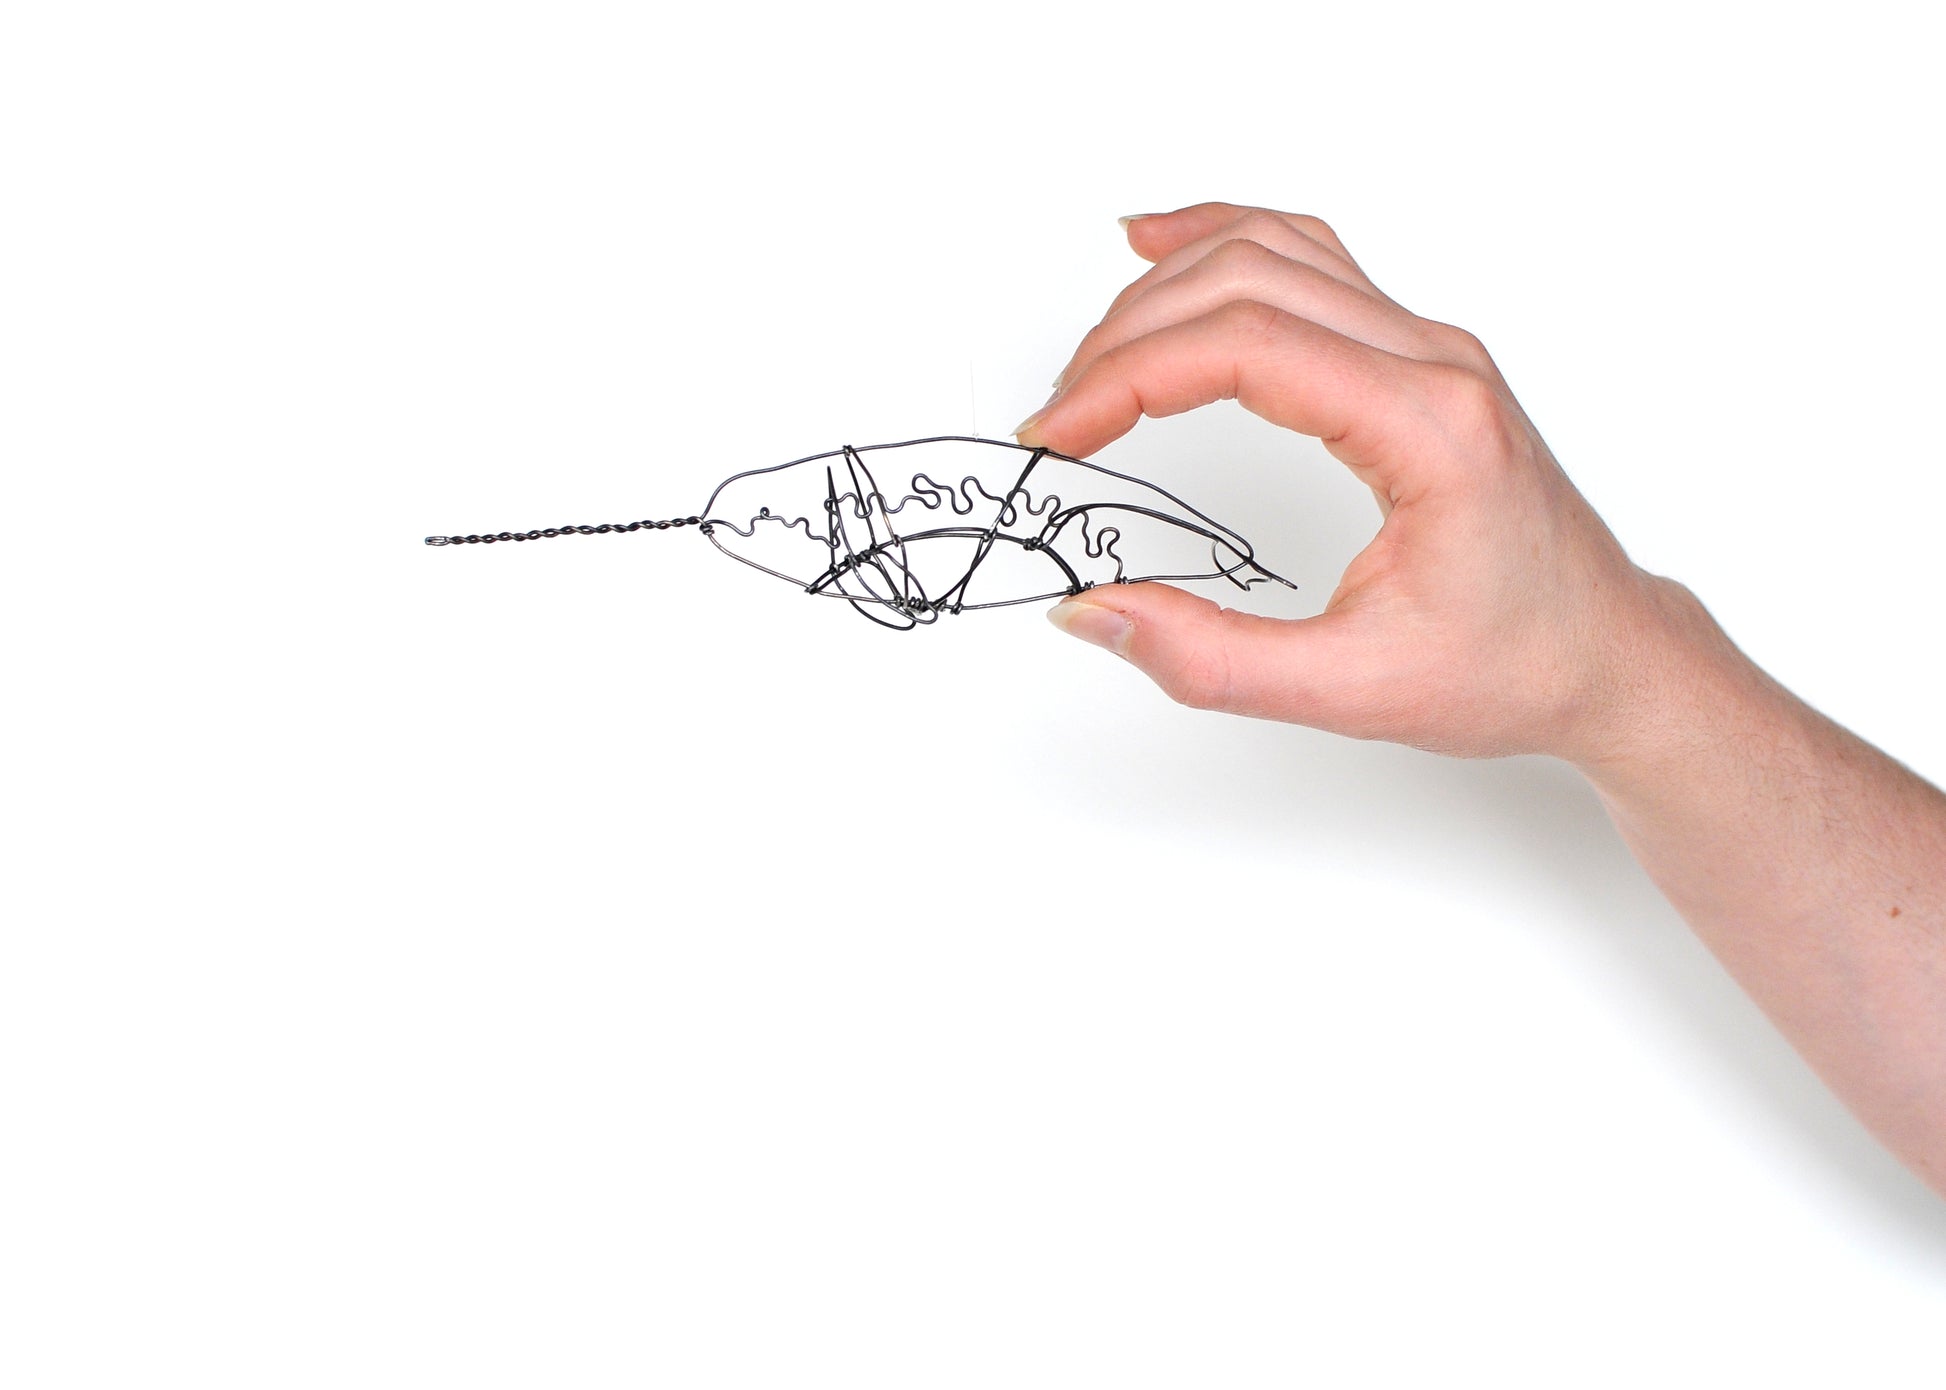 Photo of a 3D wire narwhal whale sculpture held in a hand.